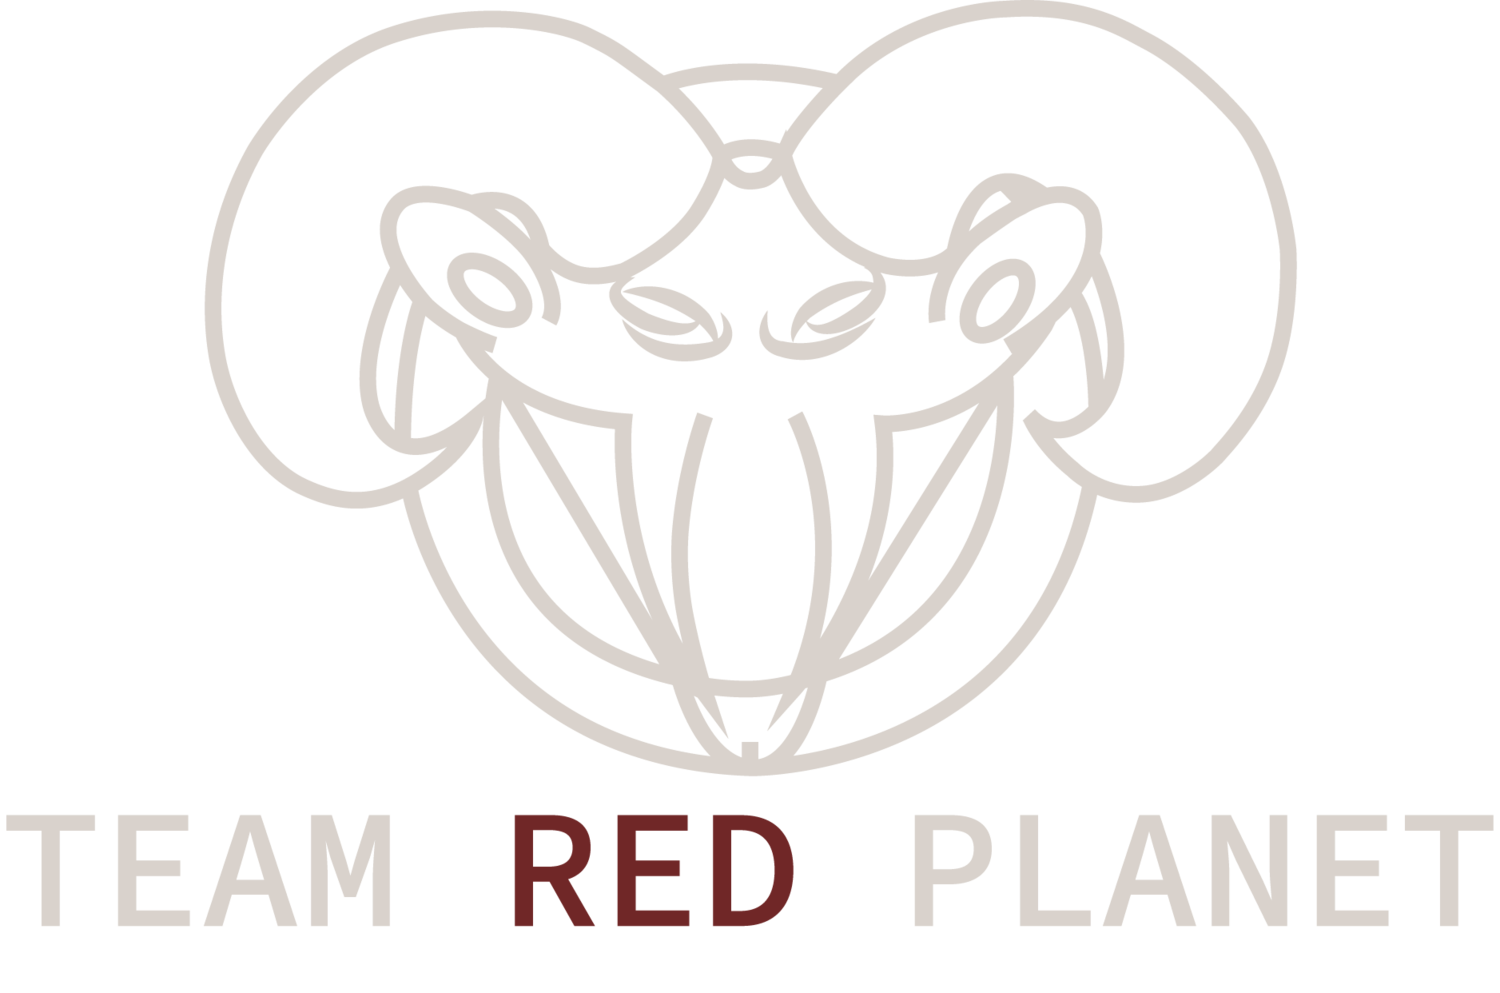 TEAM RED PLANET